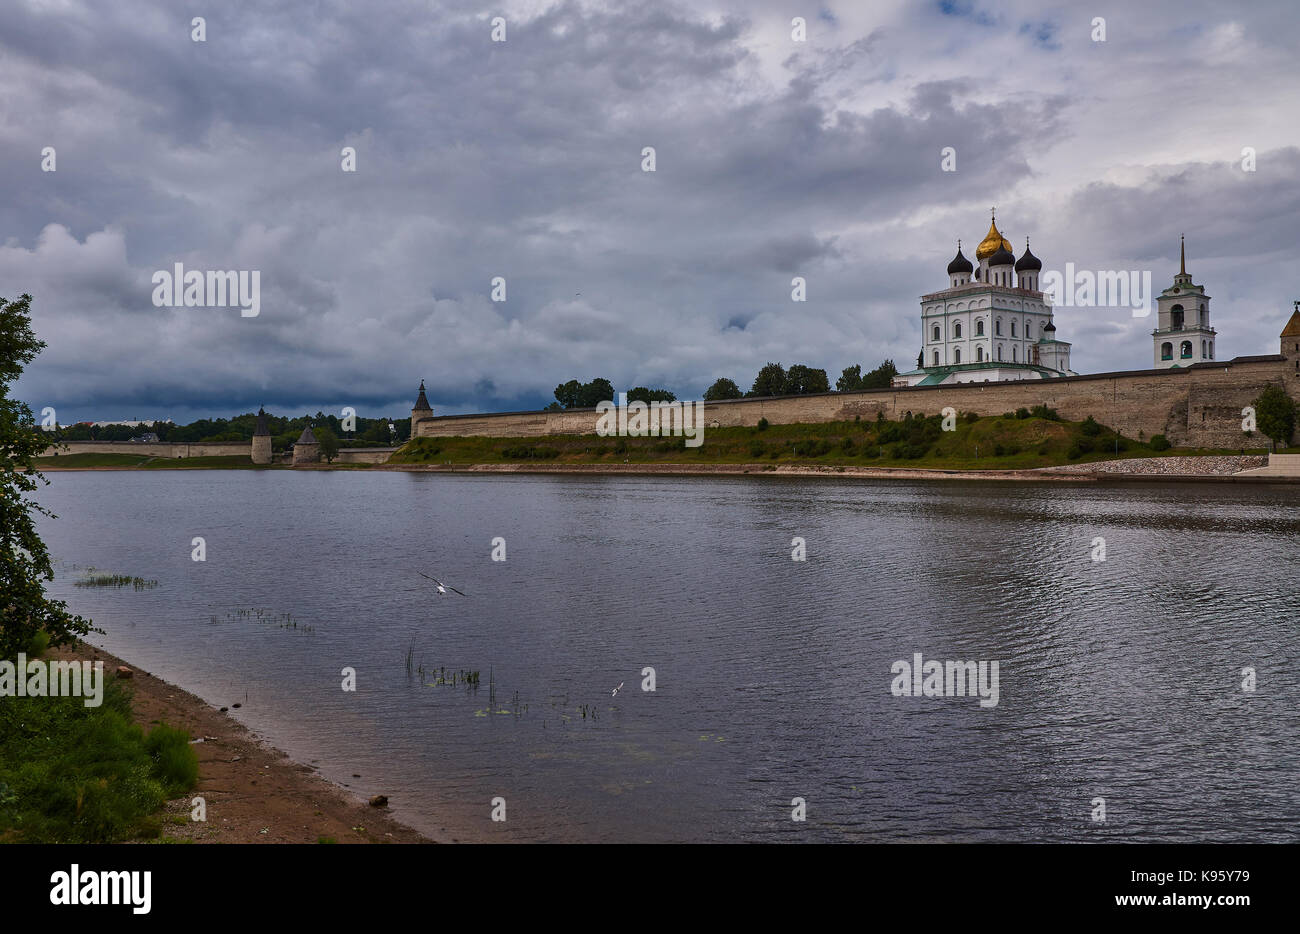 Summer, evening. The sky is covered with clouds. A gull flies over the river. On the opposite bank is the Pskov Kremlin.Russia, Pskov region,landscape Stock Photo